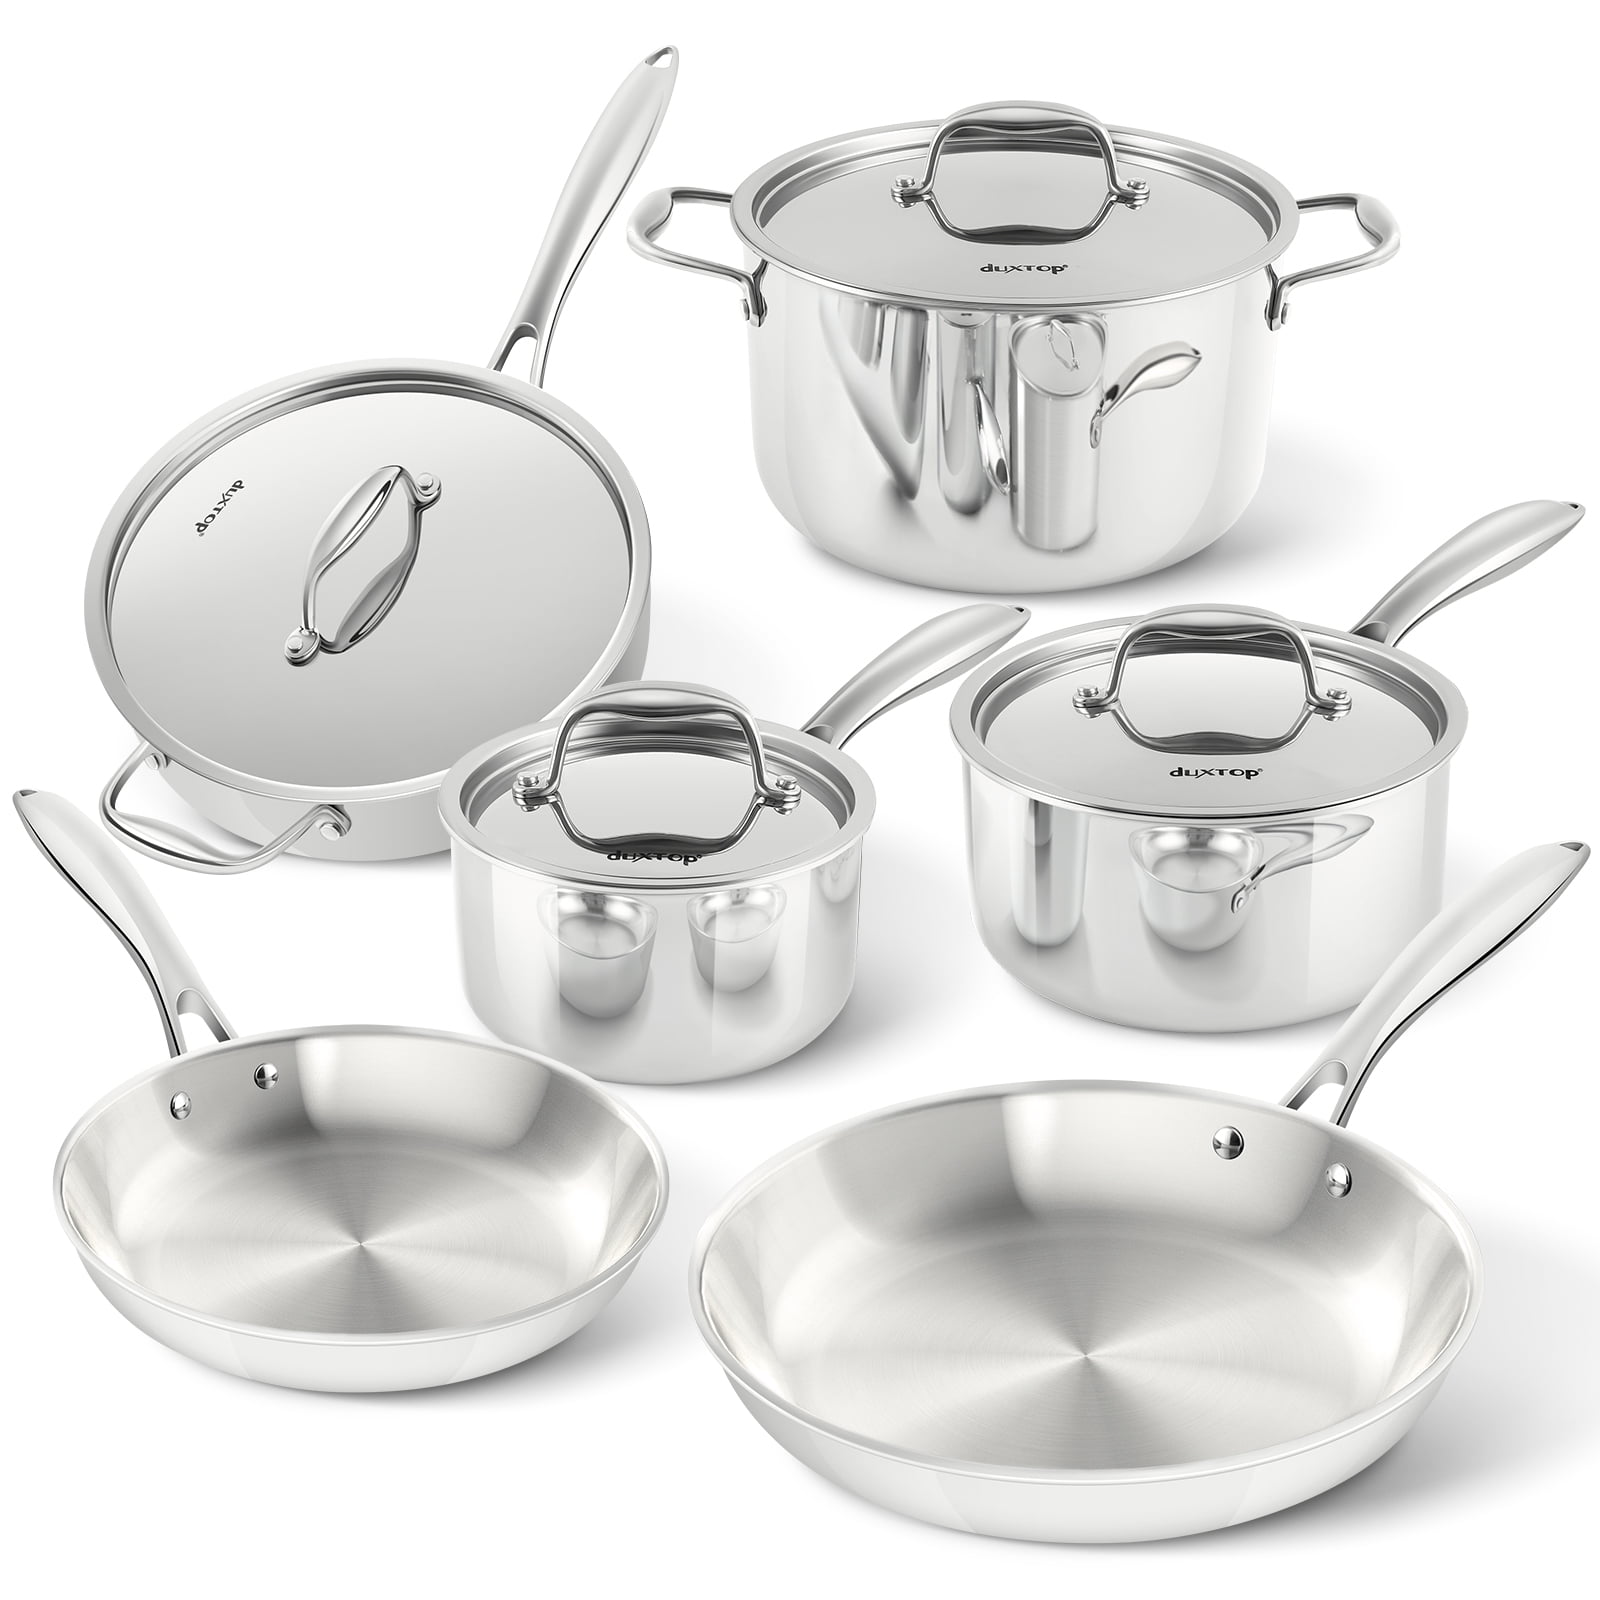 Duxtop Whole-Clad Tri-Ply Stainless Steel Induction Cookware Set, 10PC  Kitchen Pots and Pans Set, Oven and Dishwasher Safe Cookware